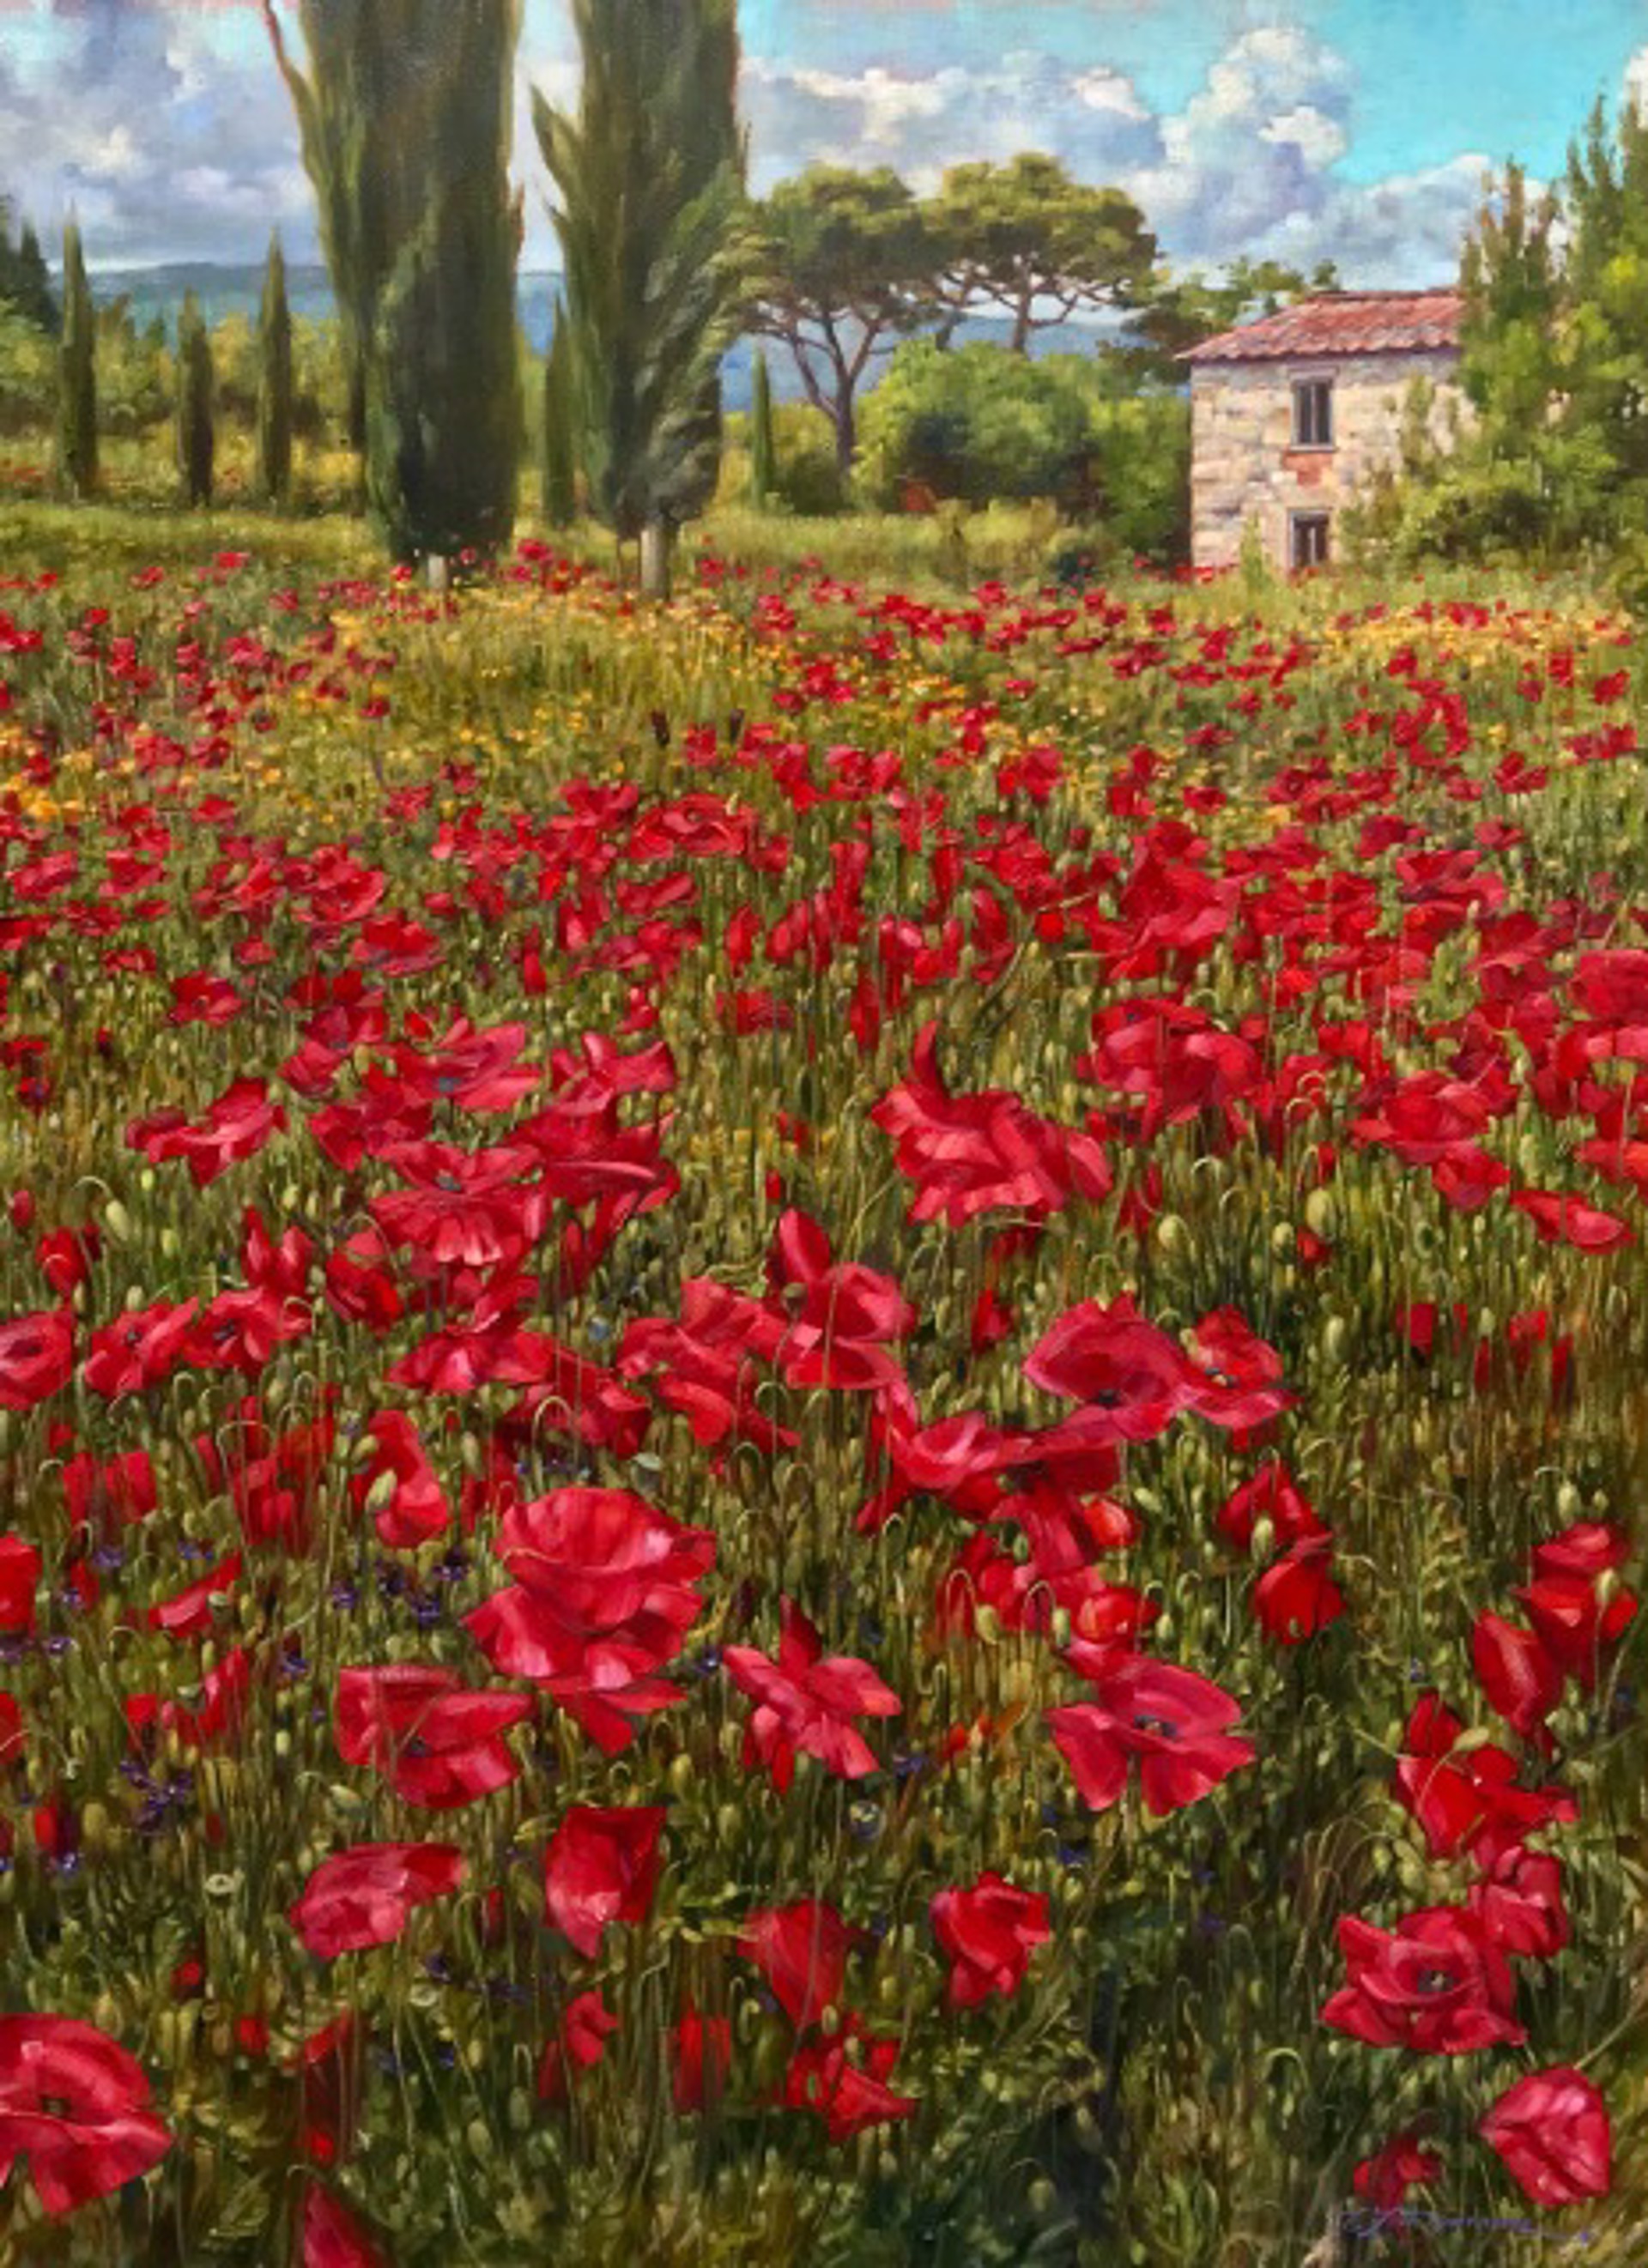 Primavera Toscana - SOLD by Commission Possibilities / Previously Sold ZX